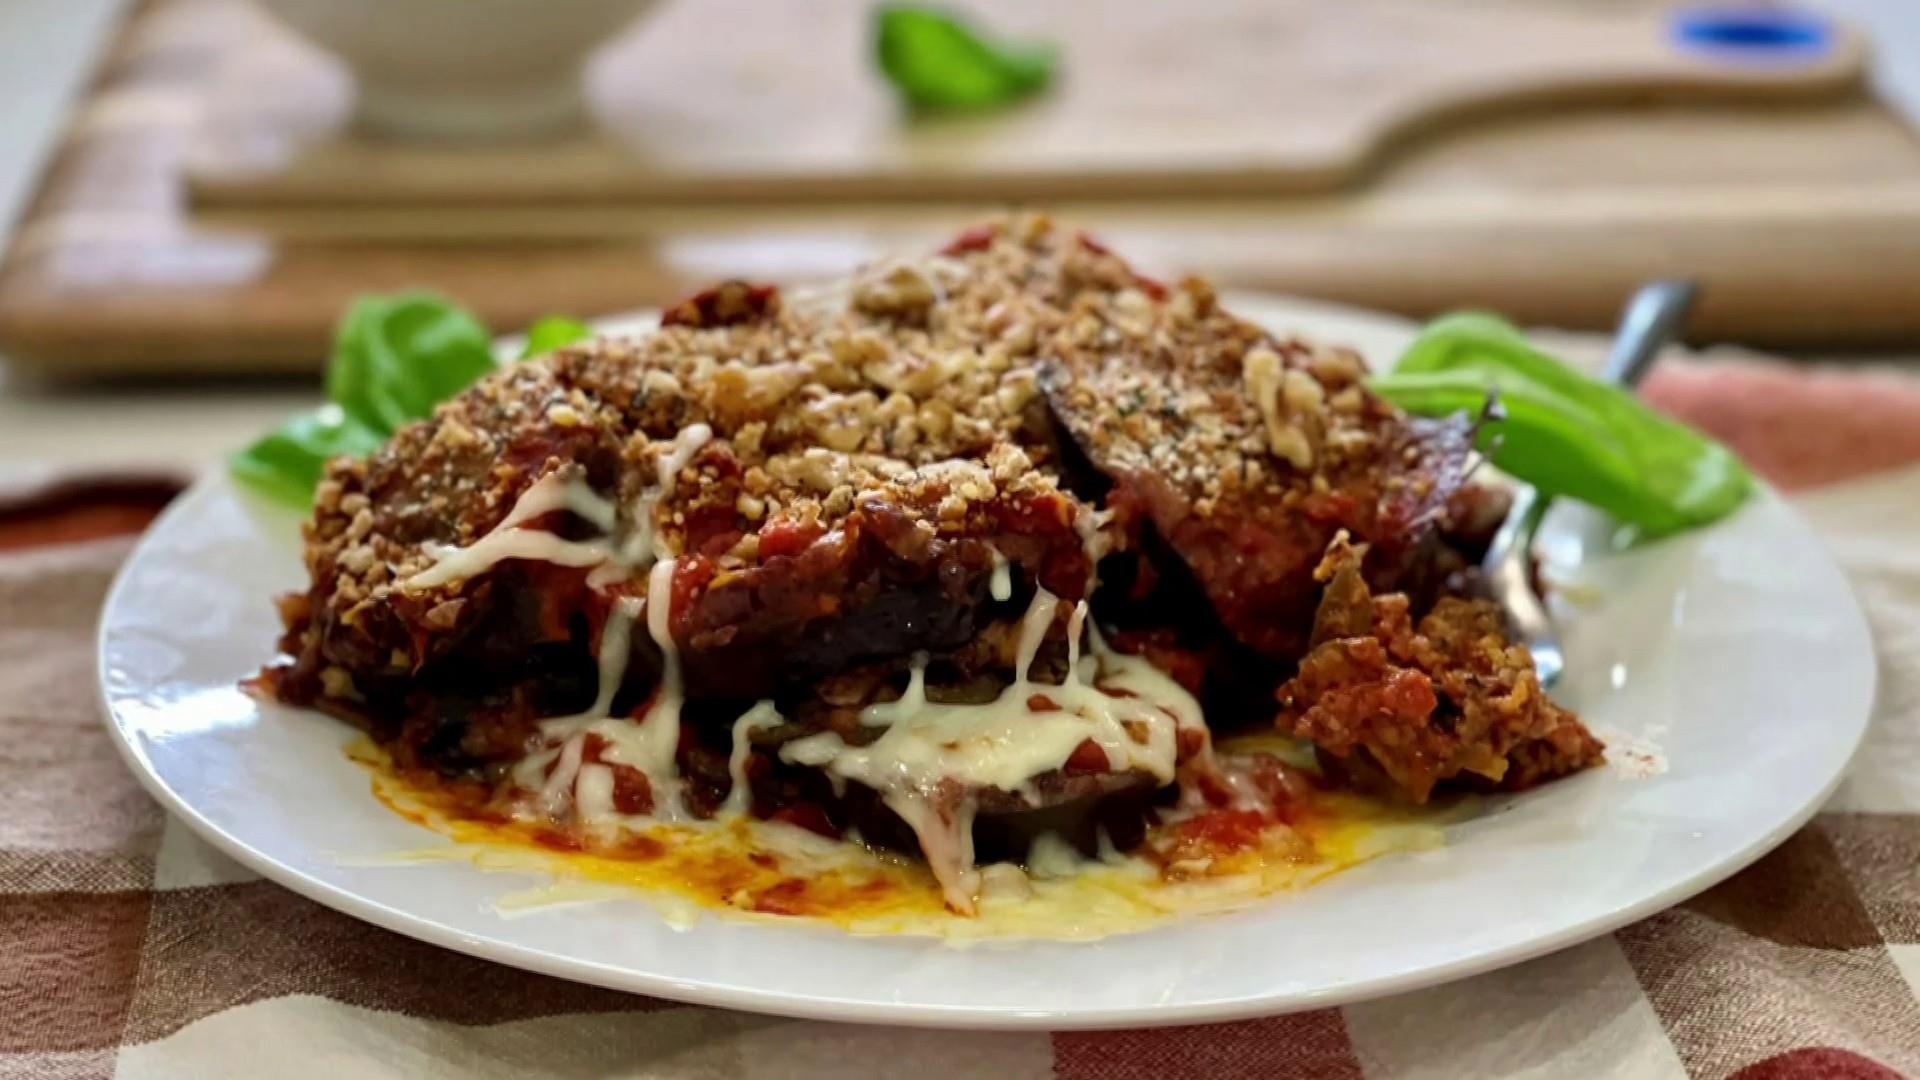 Watch TODAY Highlight: Joy Bauer makes 2 slow cooker meals: eggplant